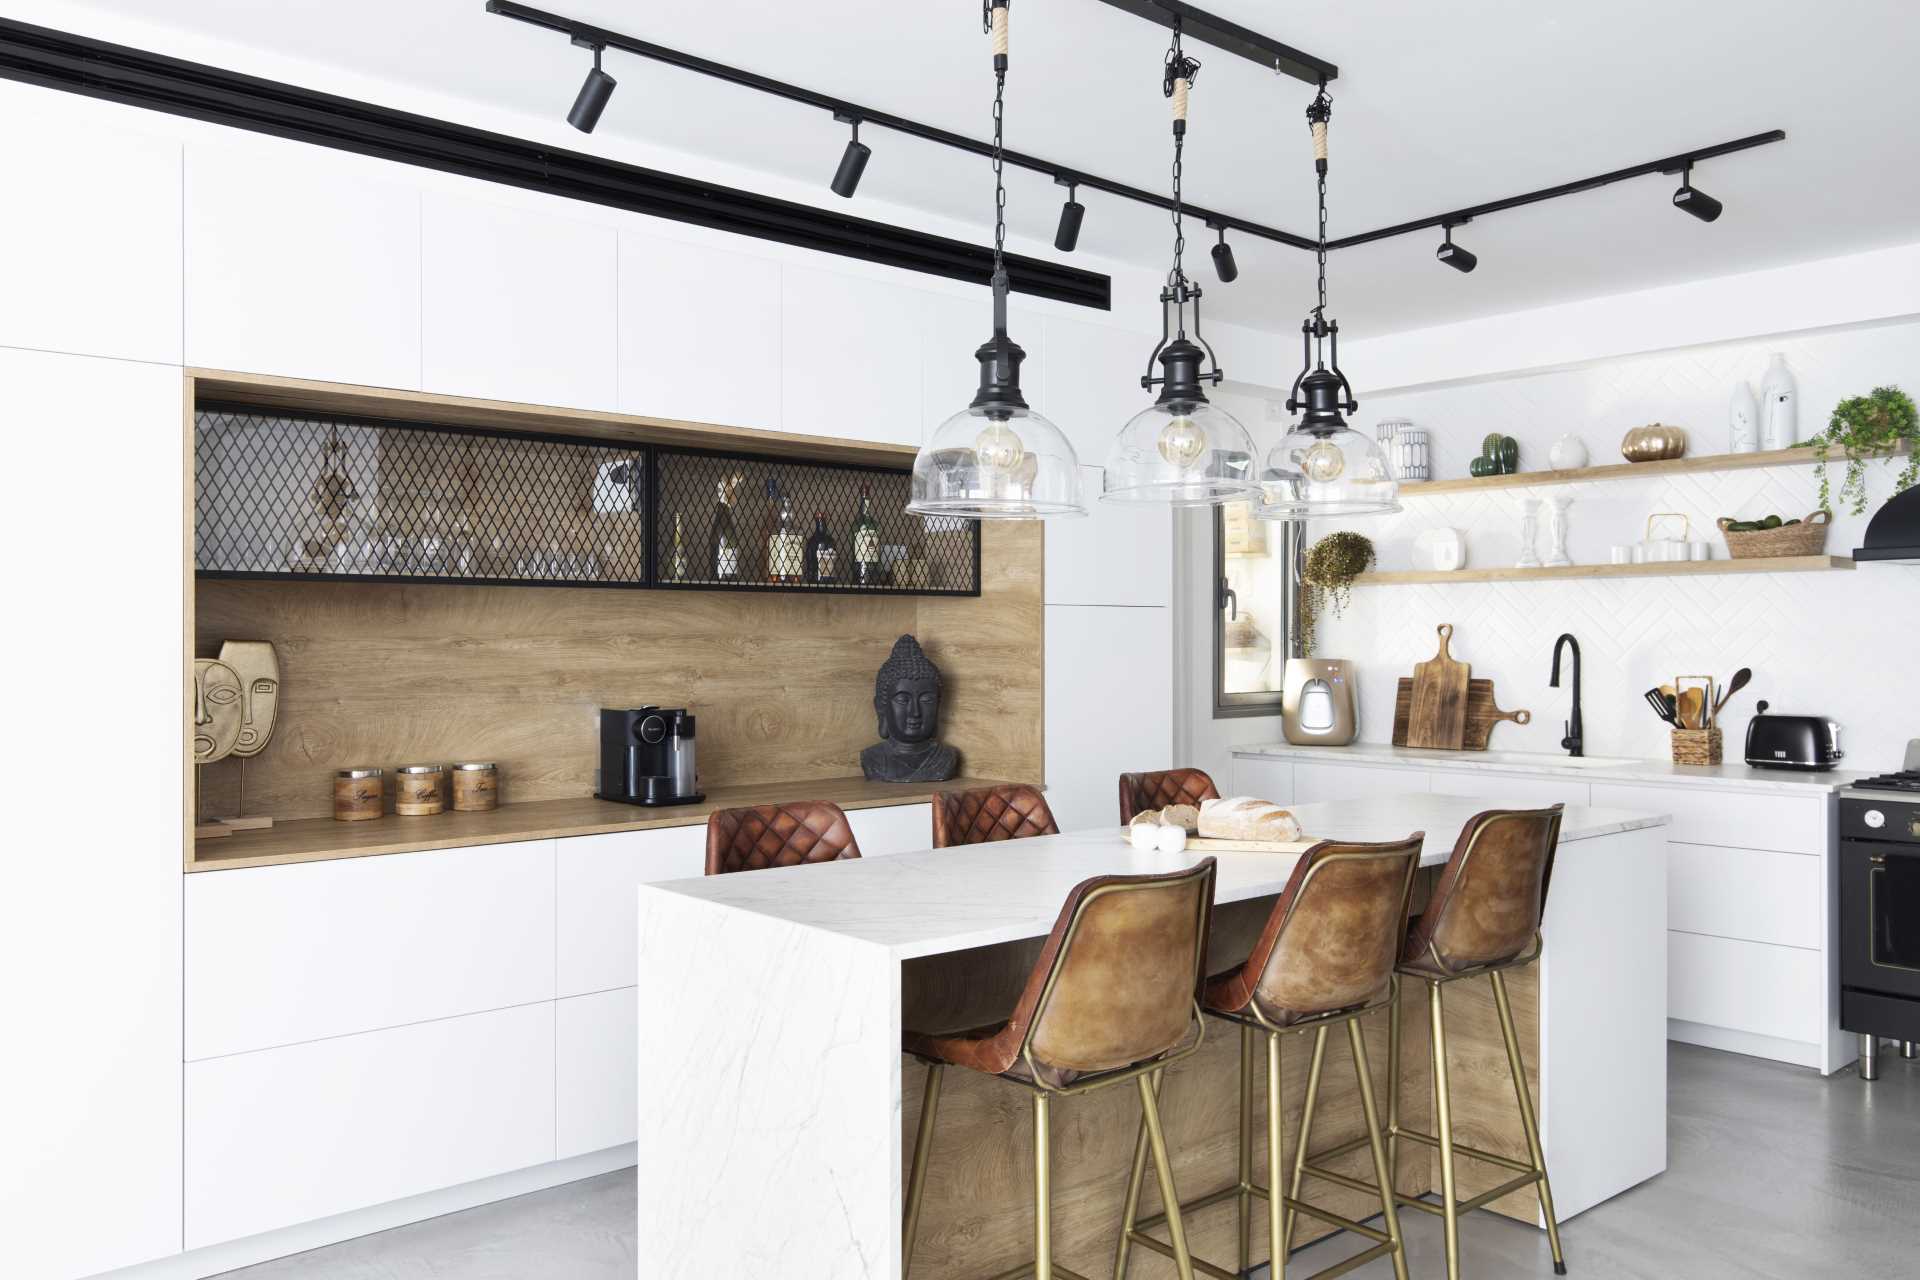 A modern white kitchen with eat-in island and wood accents.